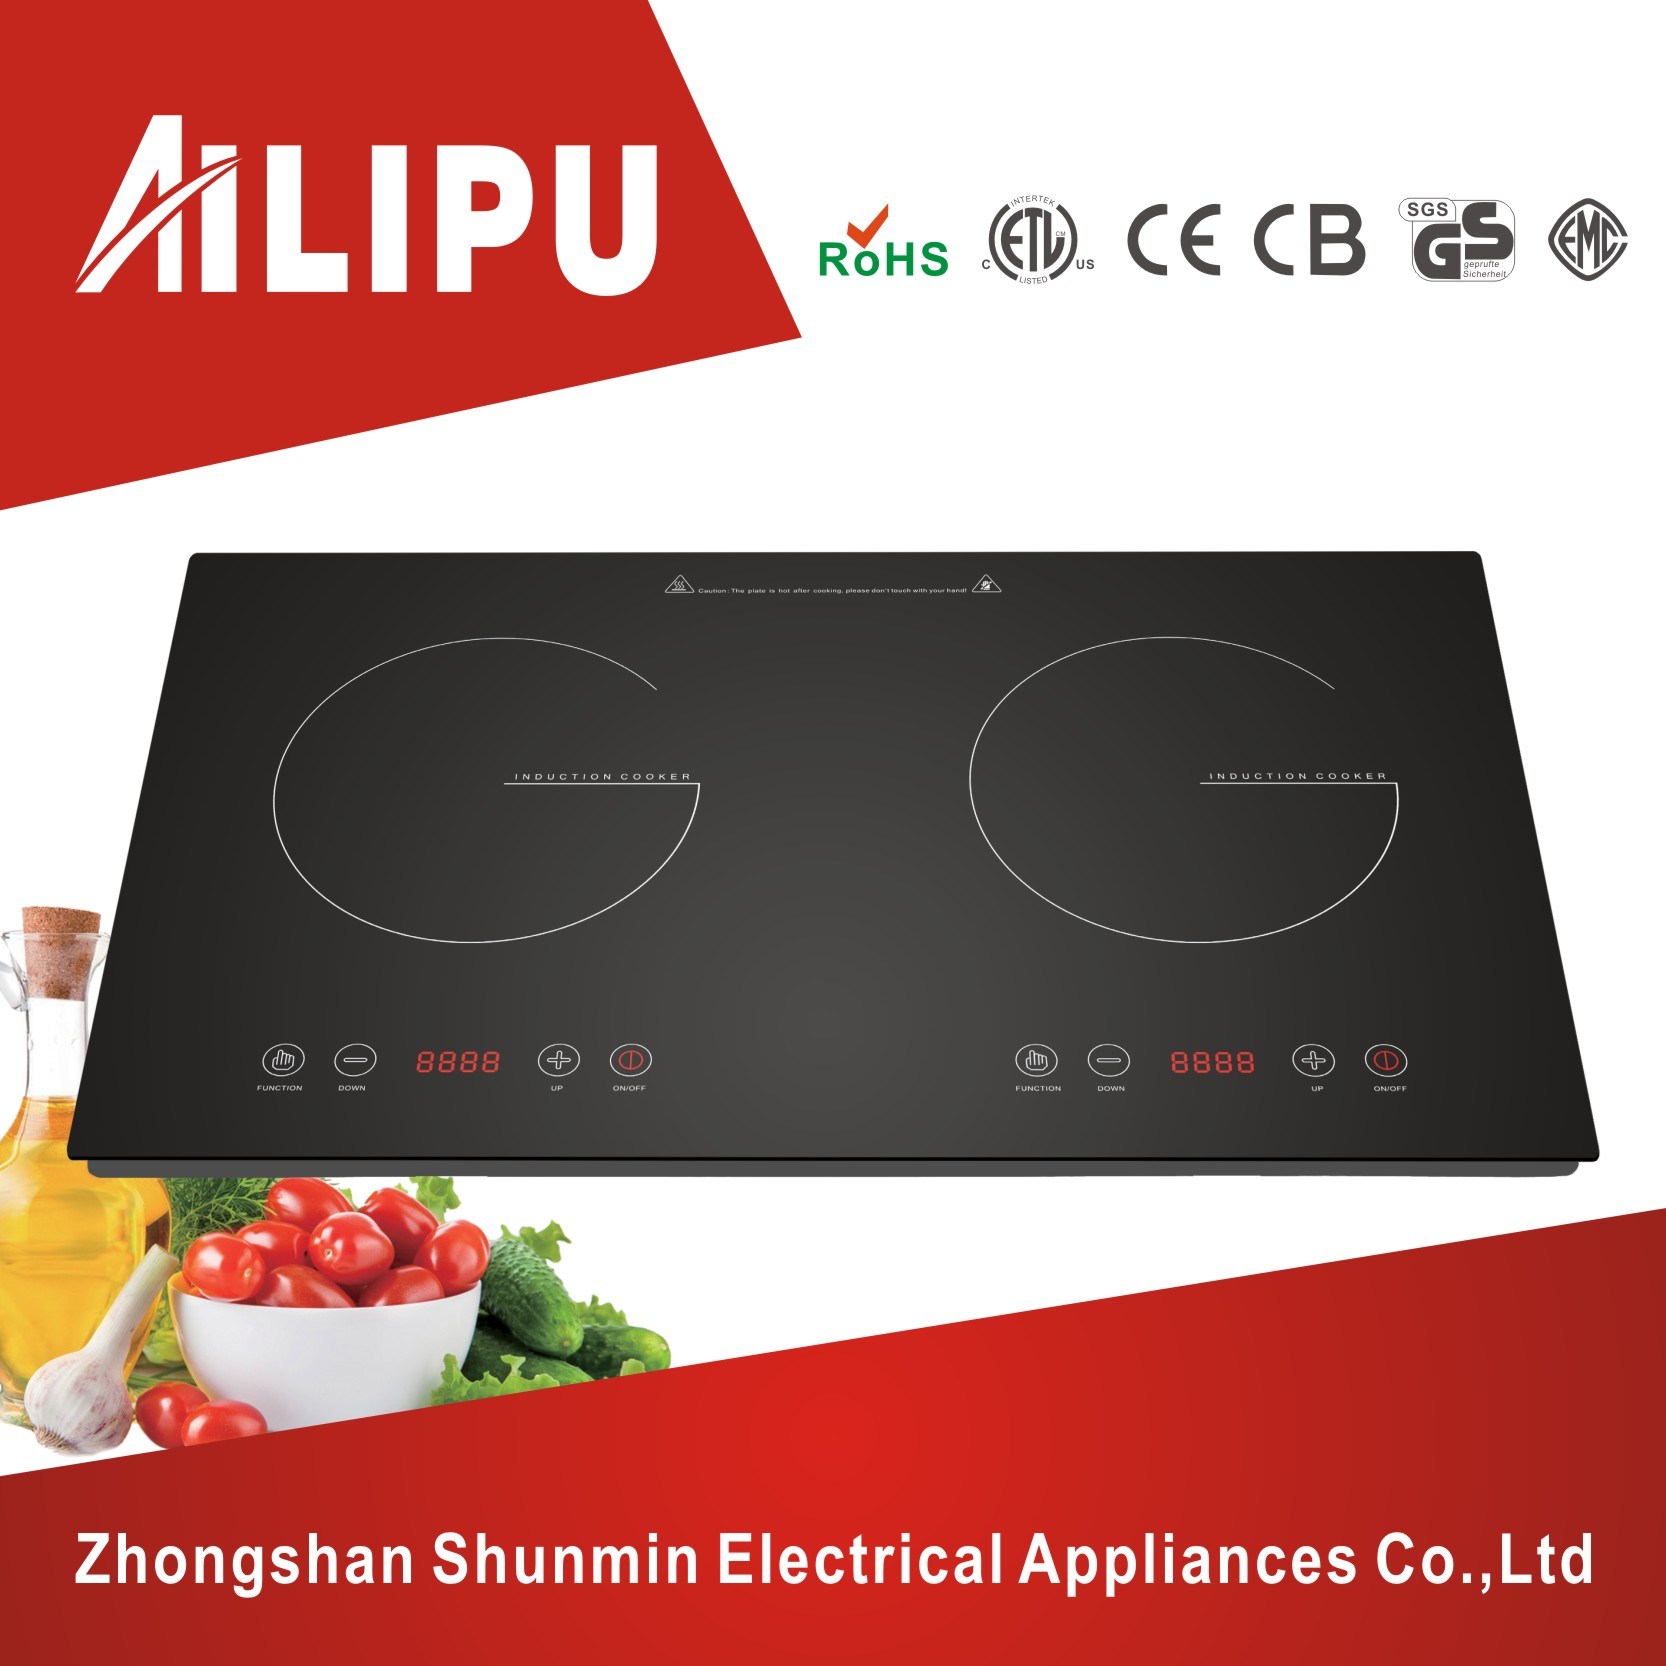 CE/RoHS Approved Double Burner Induction Stove/Two Plate Electric Cooktop/Electrical Cooker